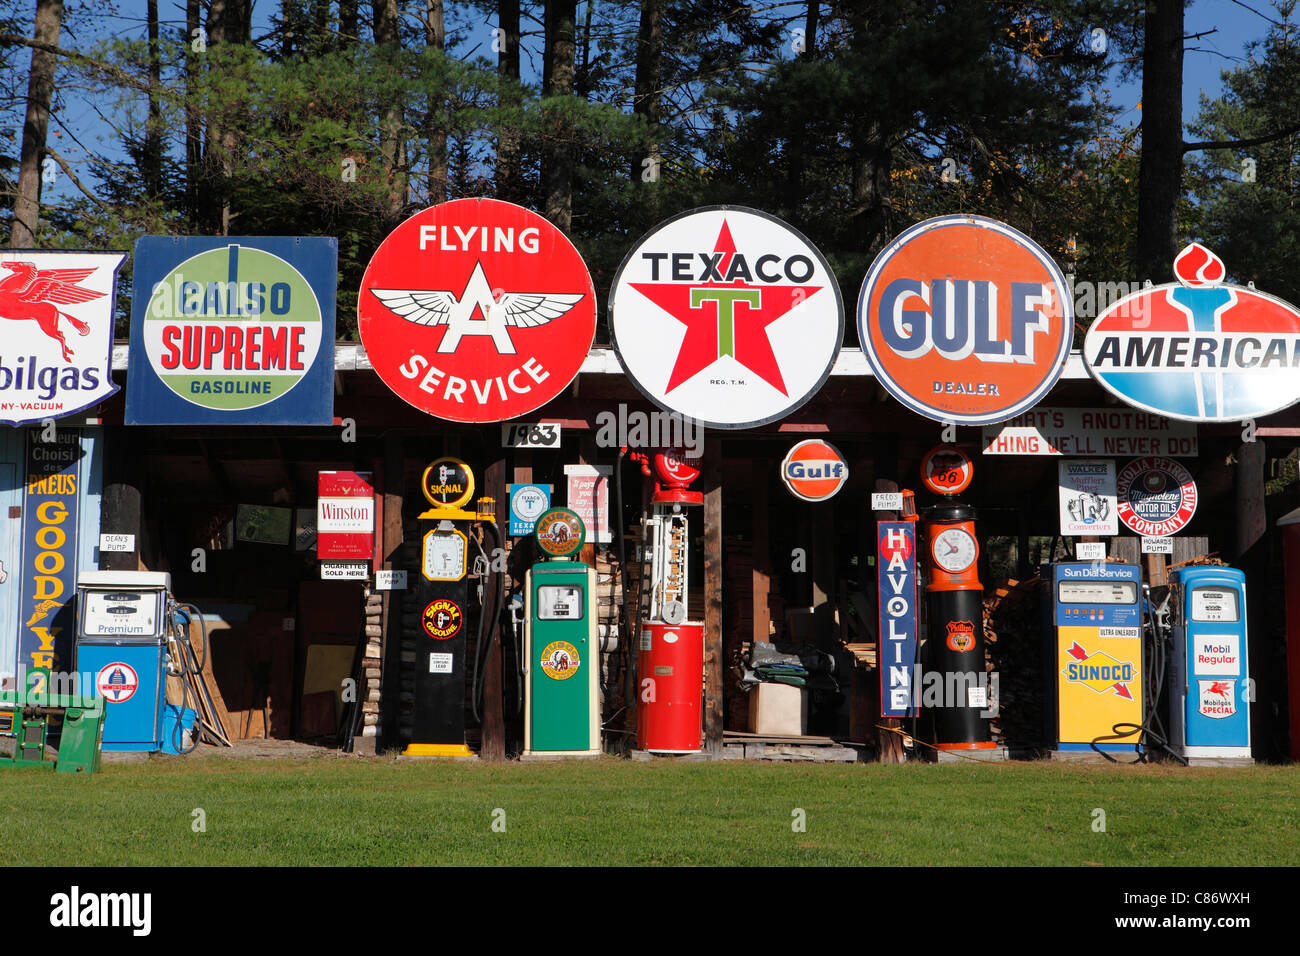 Classic filling station signs, logos and pumps on display by a collector in New Hampshire, USA Stock Photo